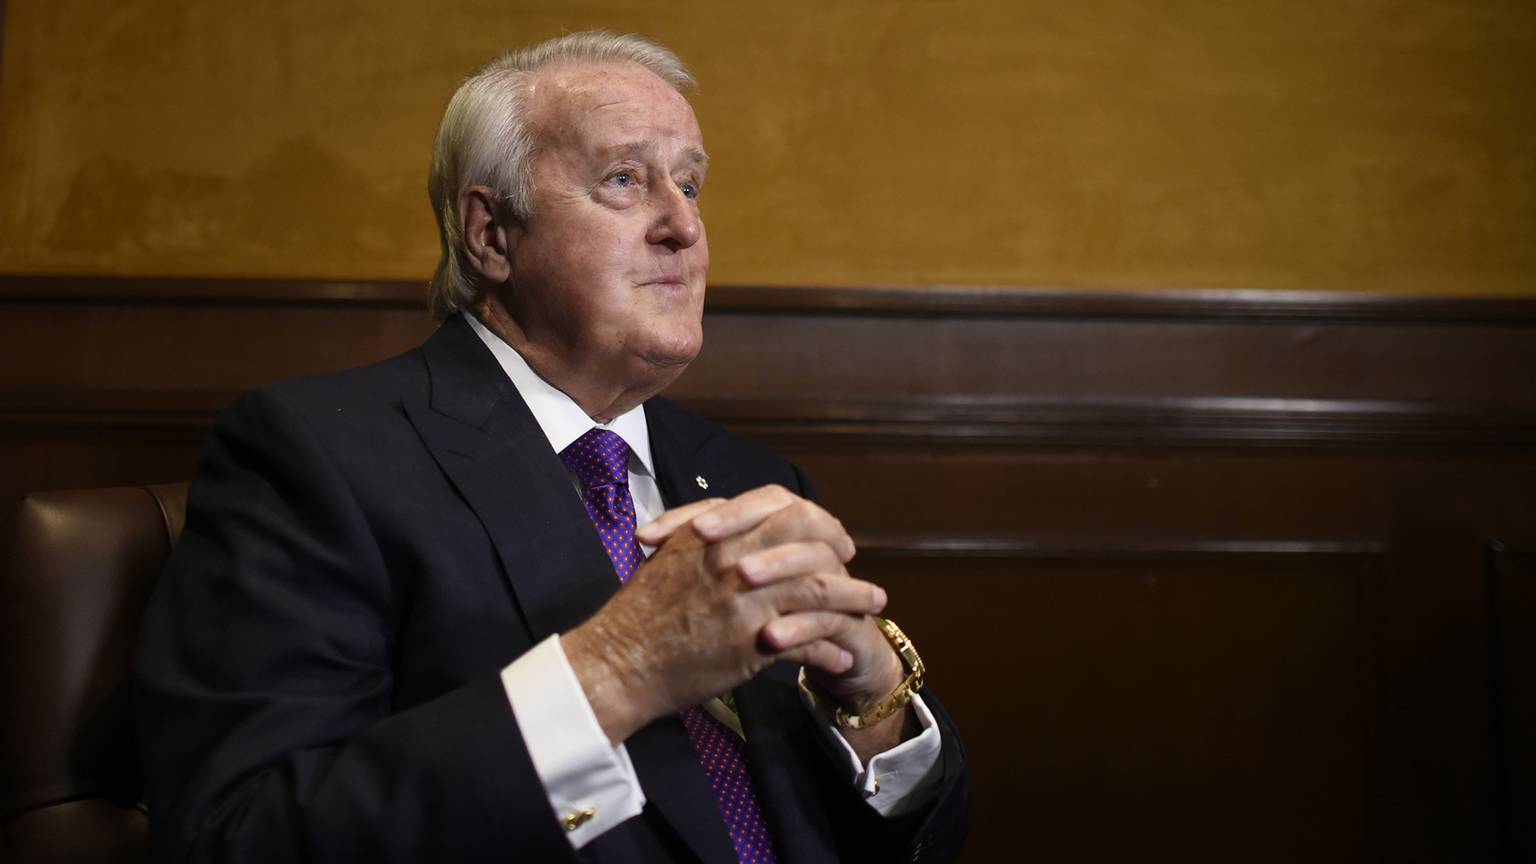 Video: Two generations of political reporters reflect on Brian Mulroney’s legacy [Video]